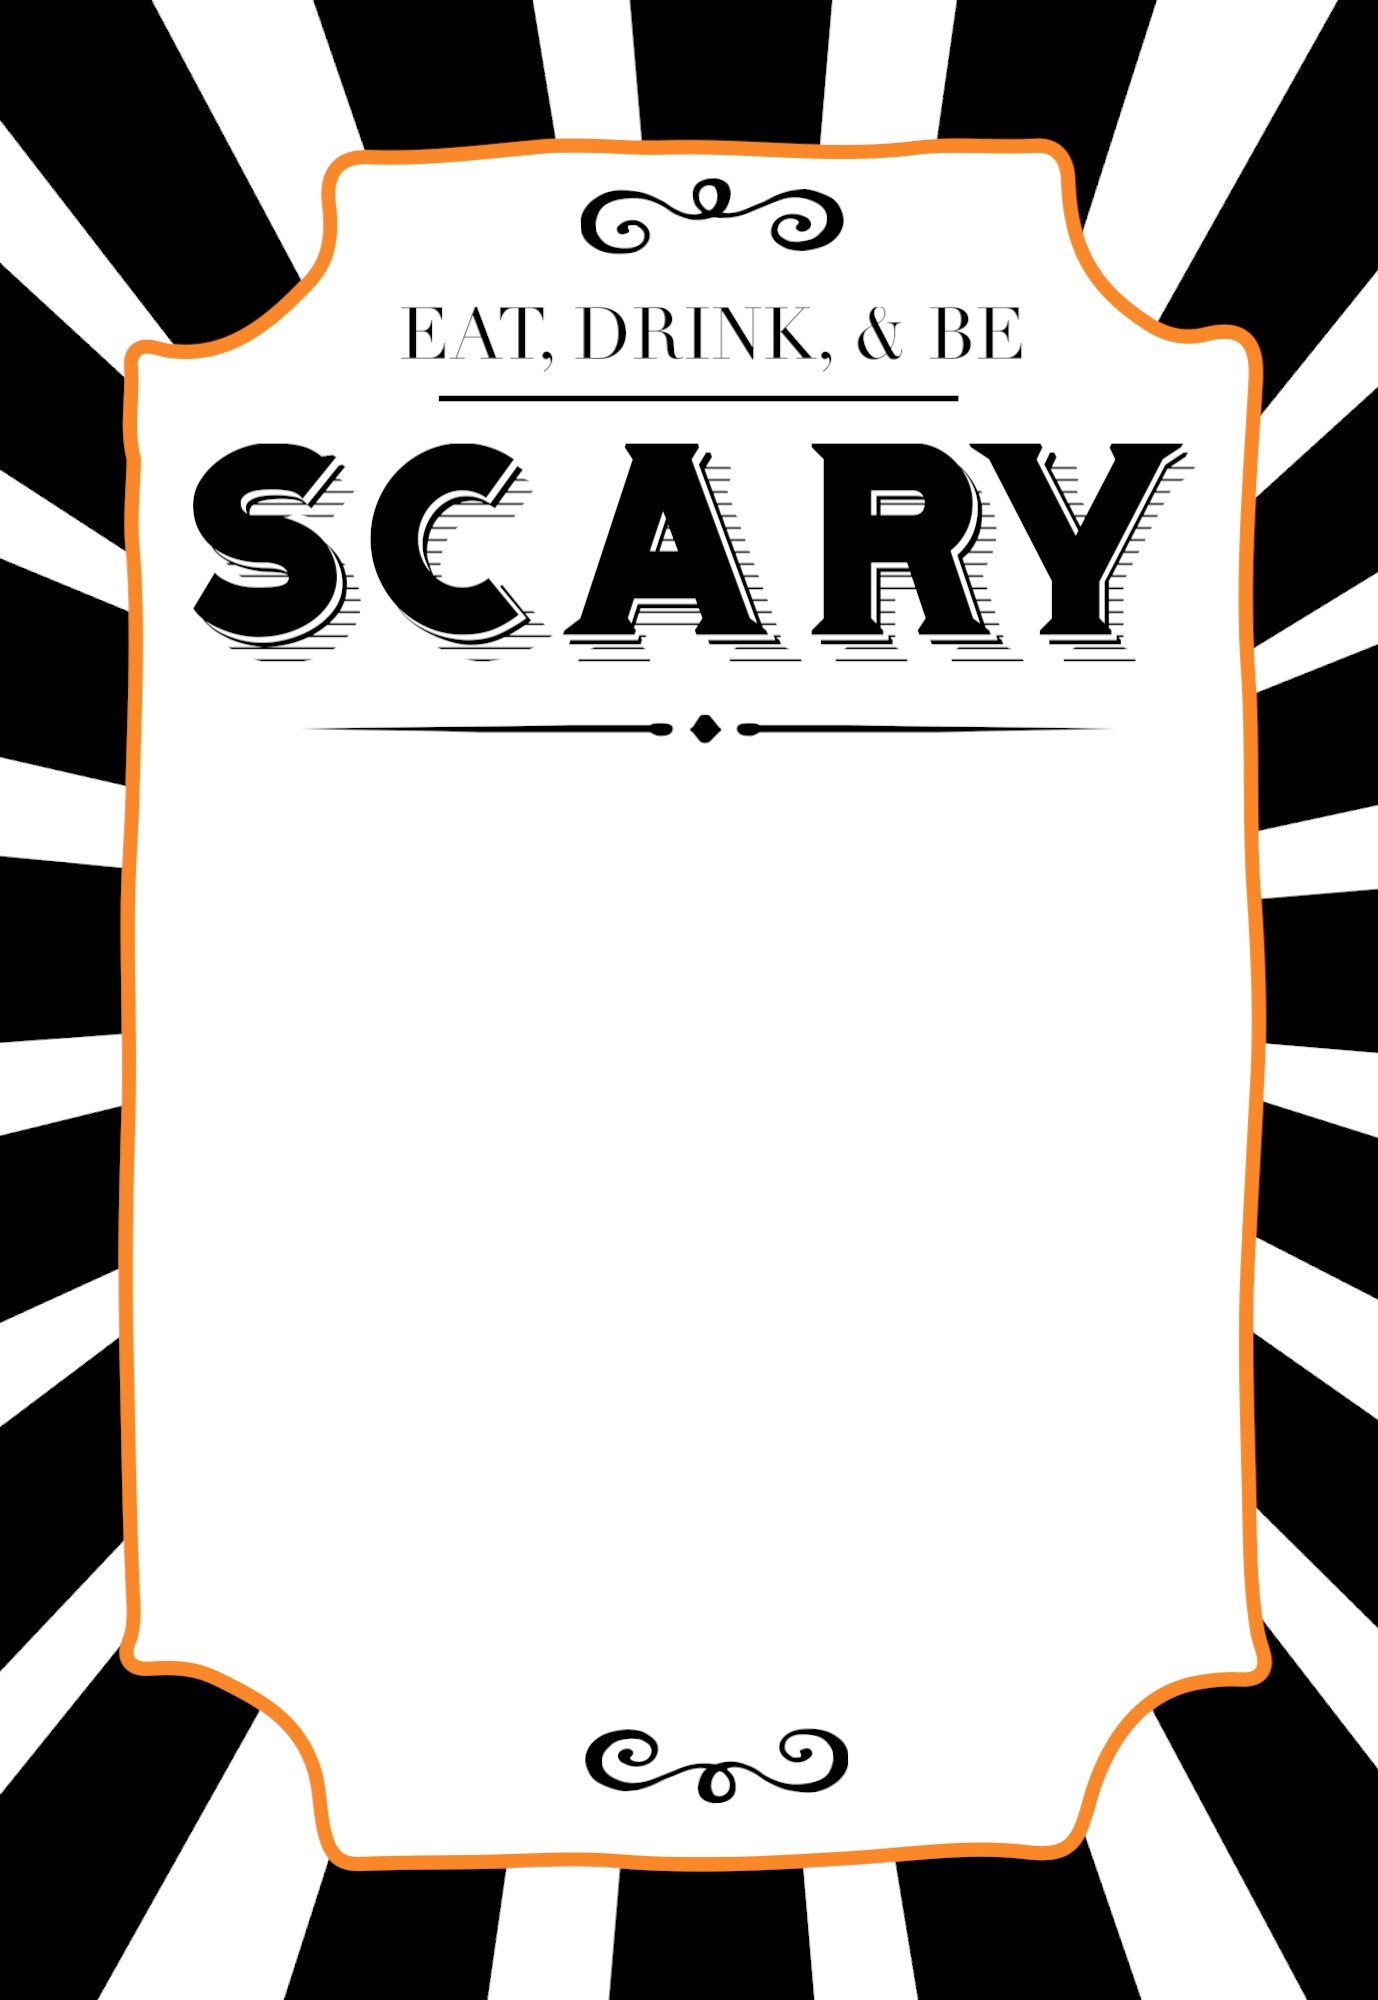 Halloween Invitations Free Printable Template - Paper Trail Design - Halloween Invitations Free Printable Black And White